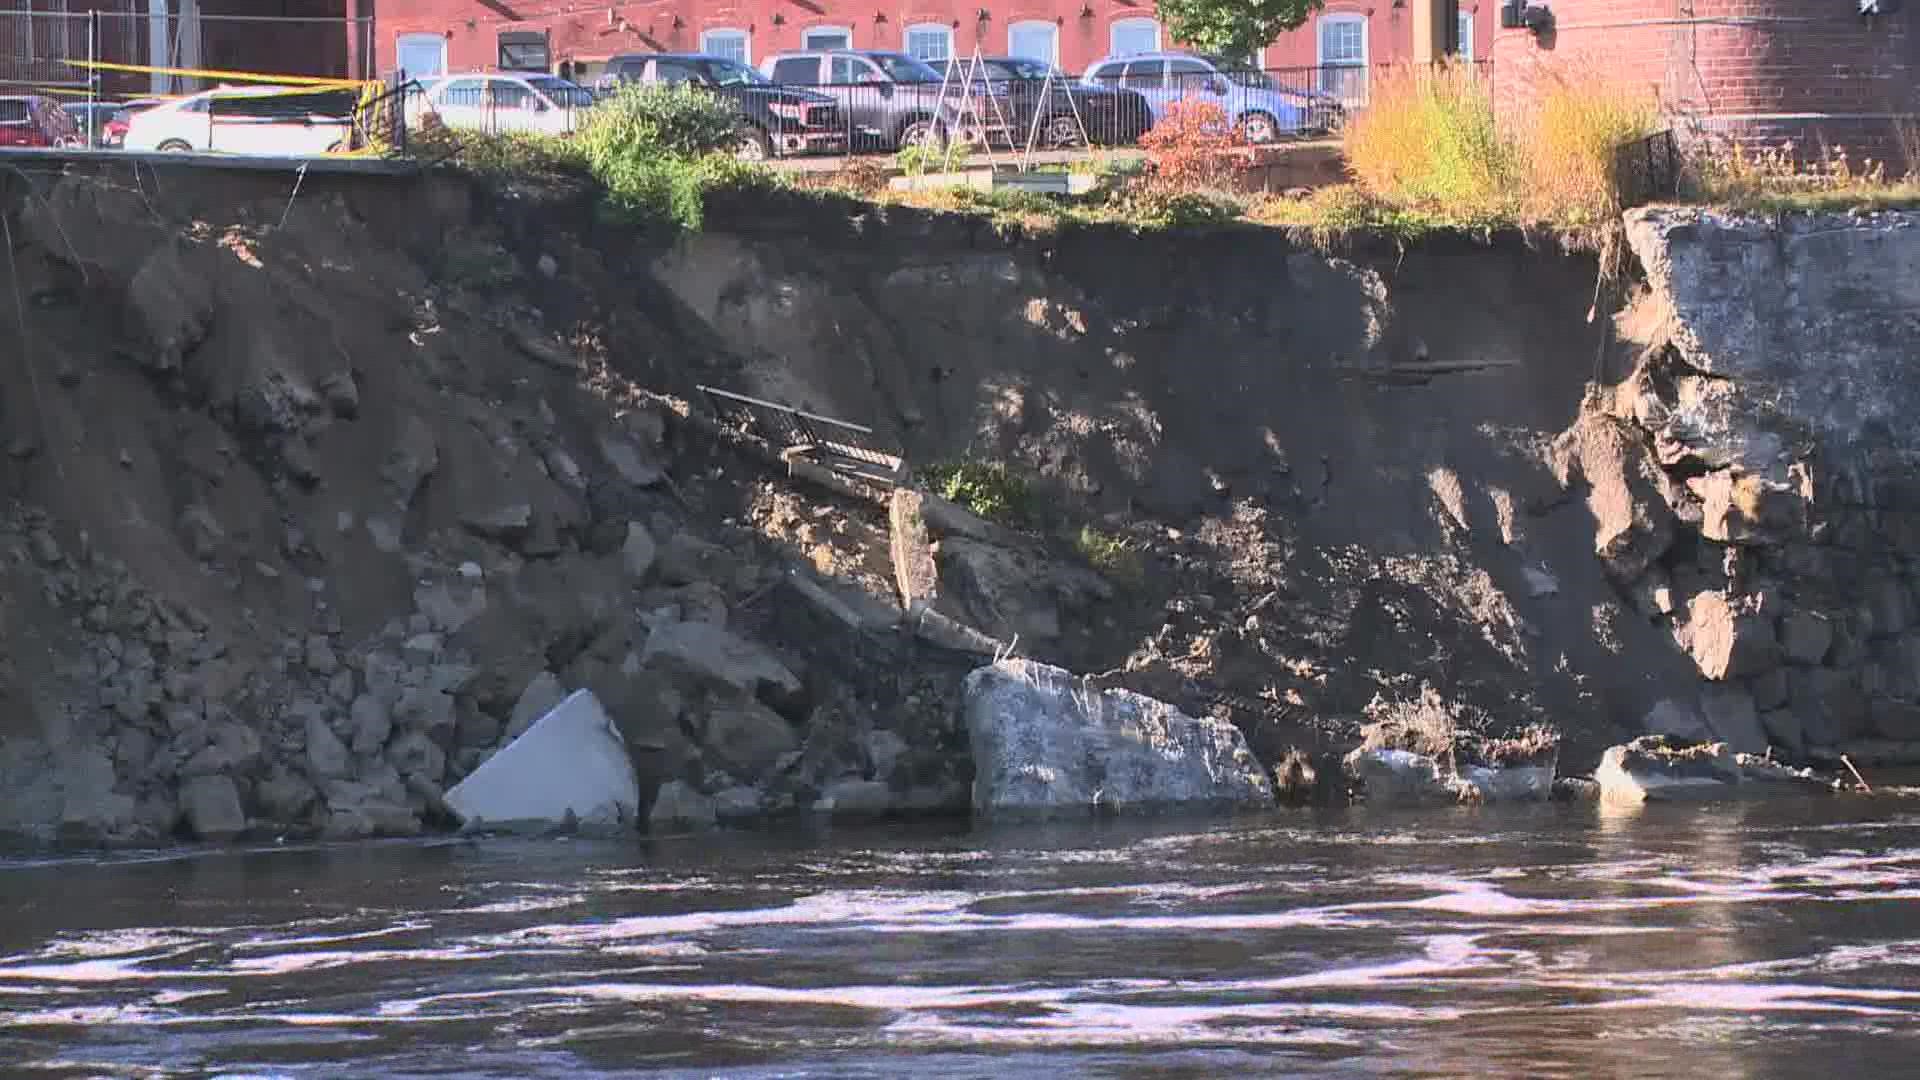 According to city officials, Saturday's powerful storm washed away roughly 77 feet of the wall and walkway along the river.